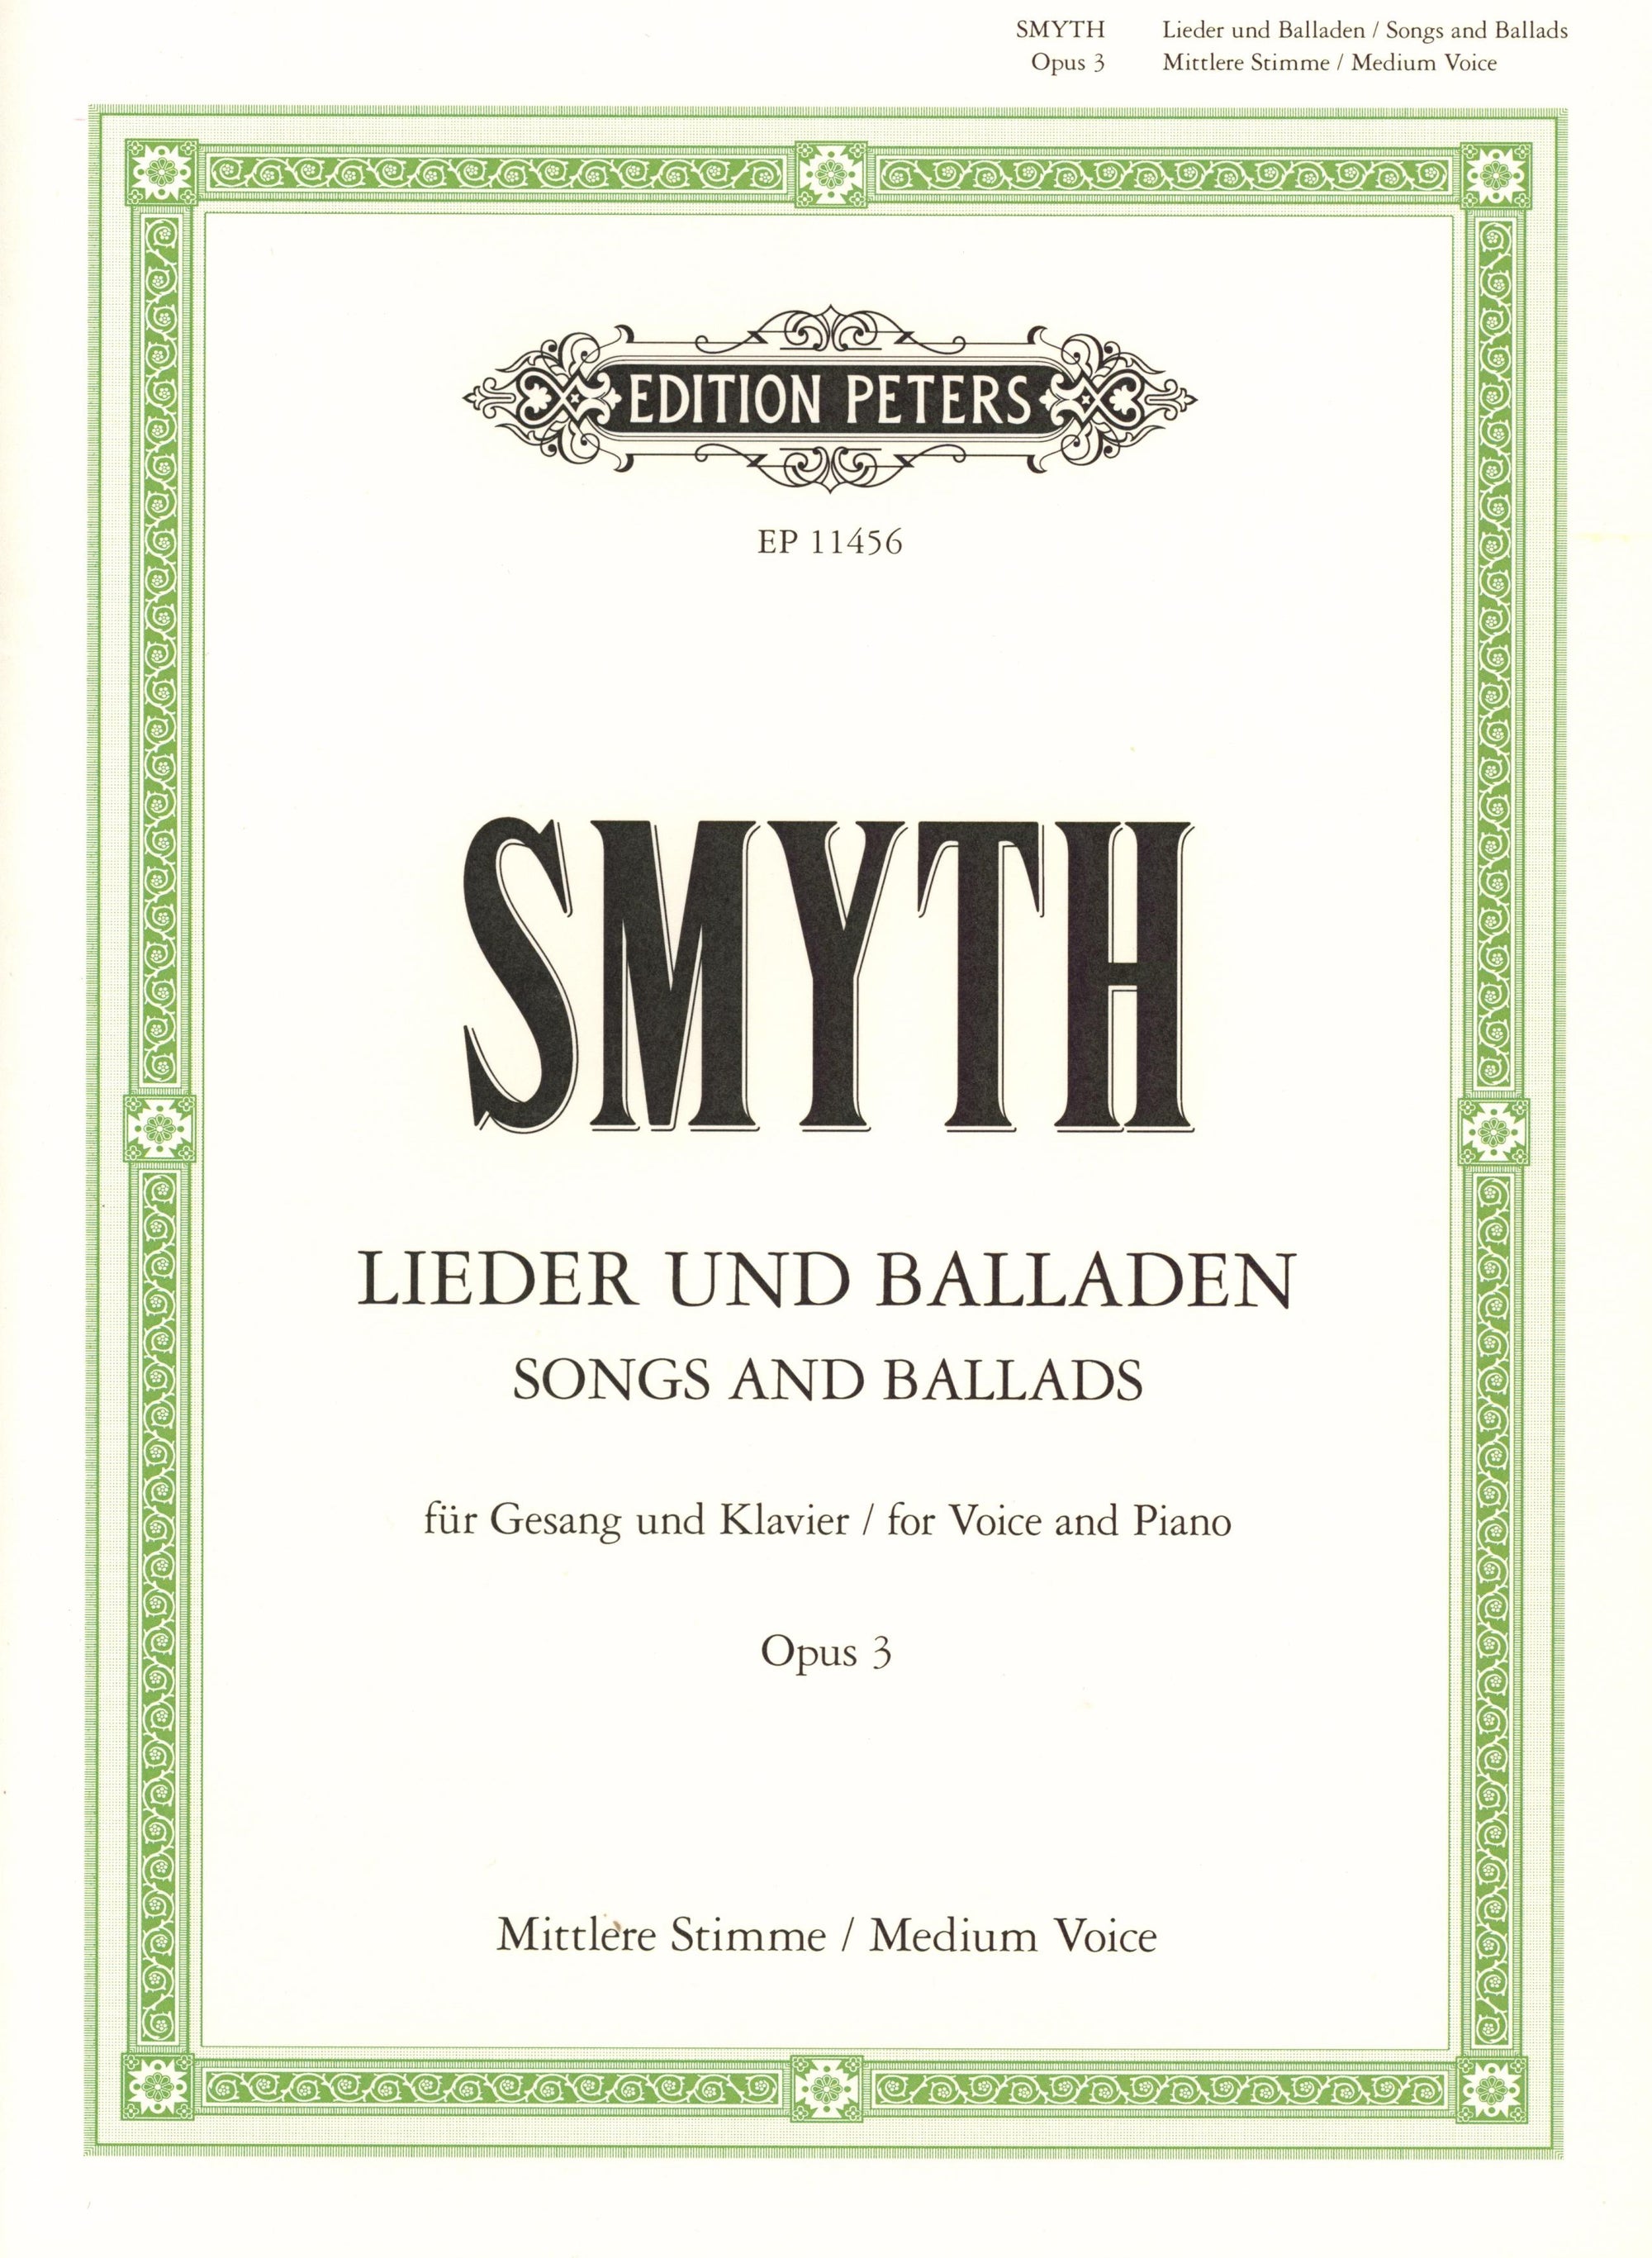 Smyth: Songs and Ballads, Op. 3